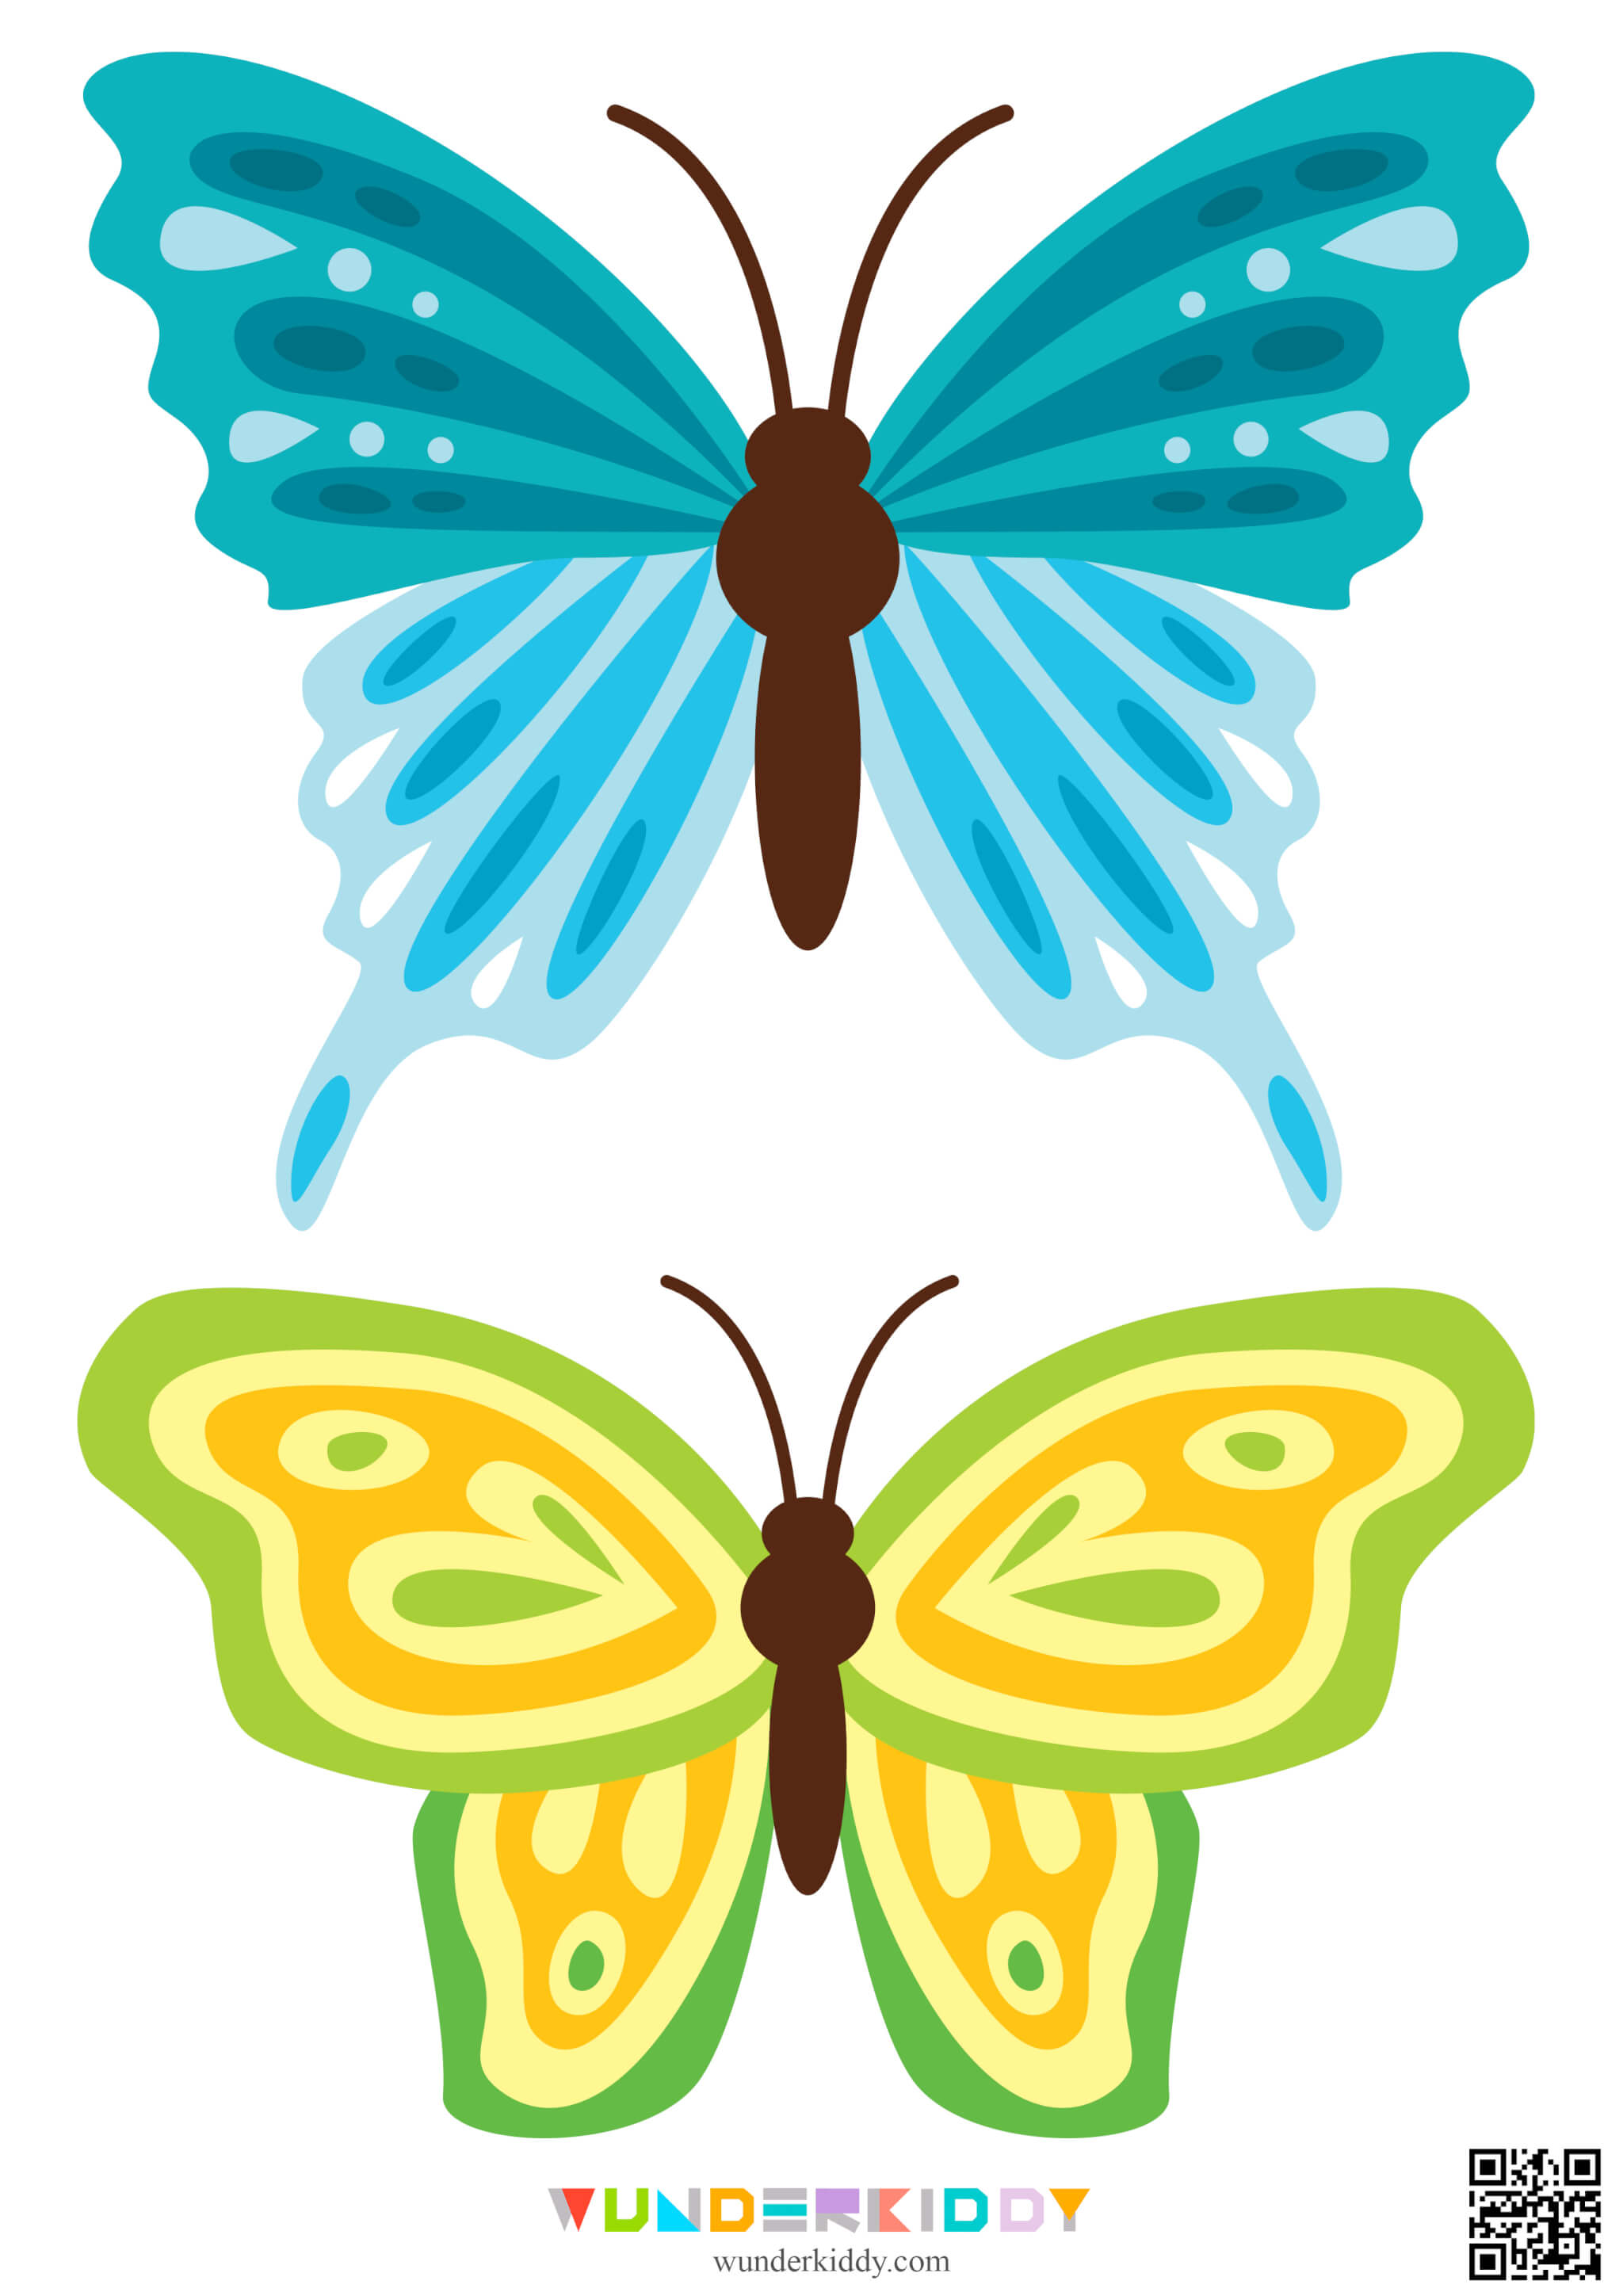 Free Printable Butterfly Templates - Image 8